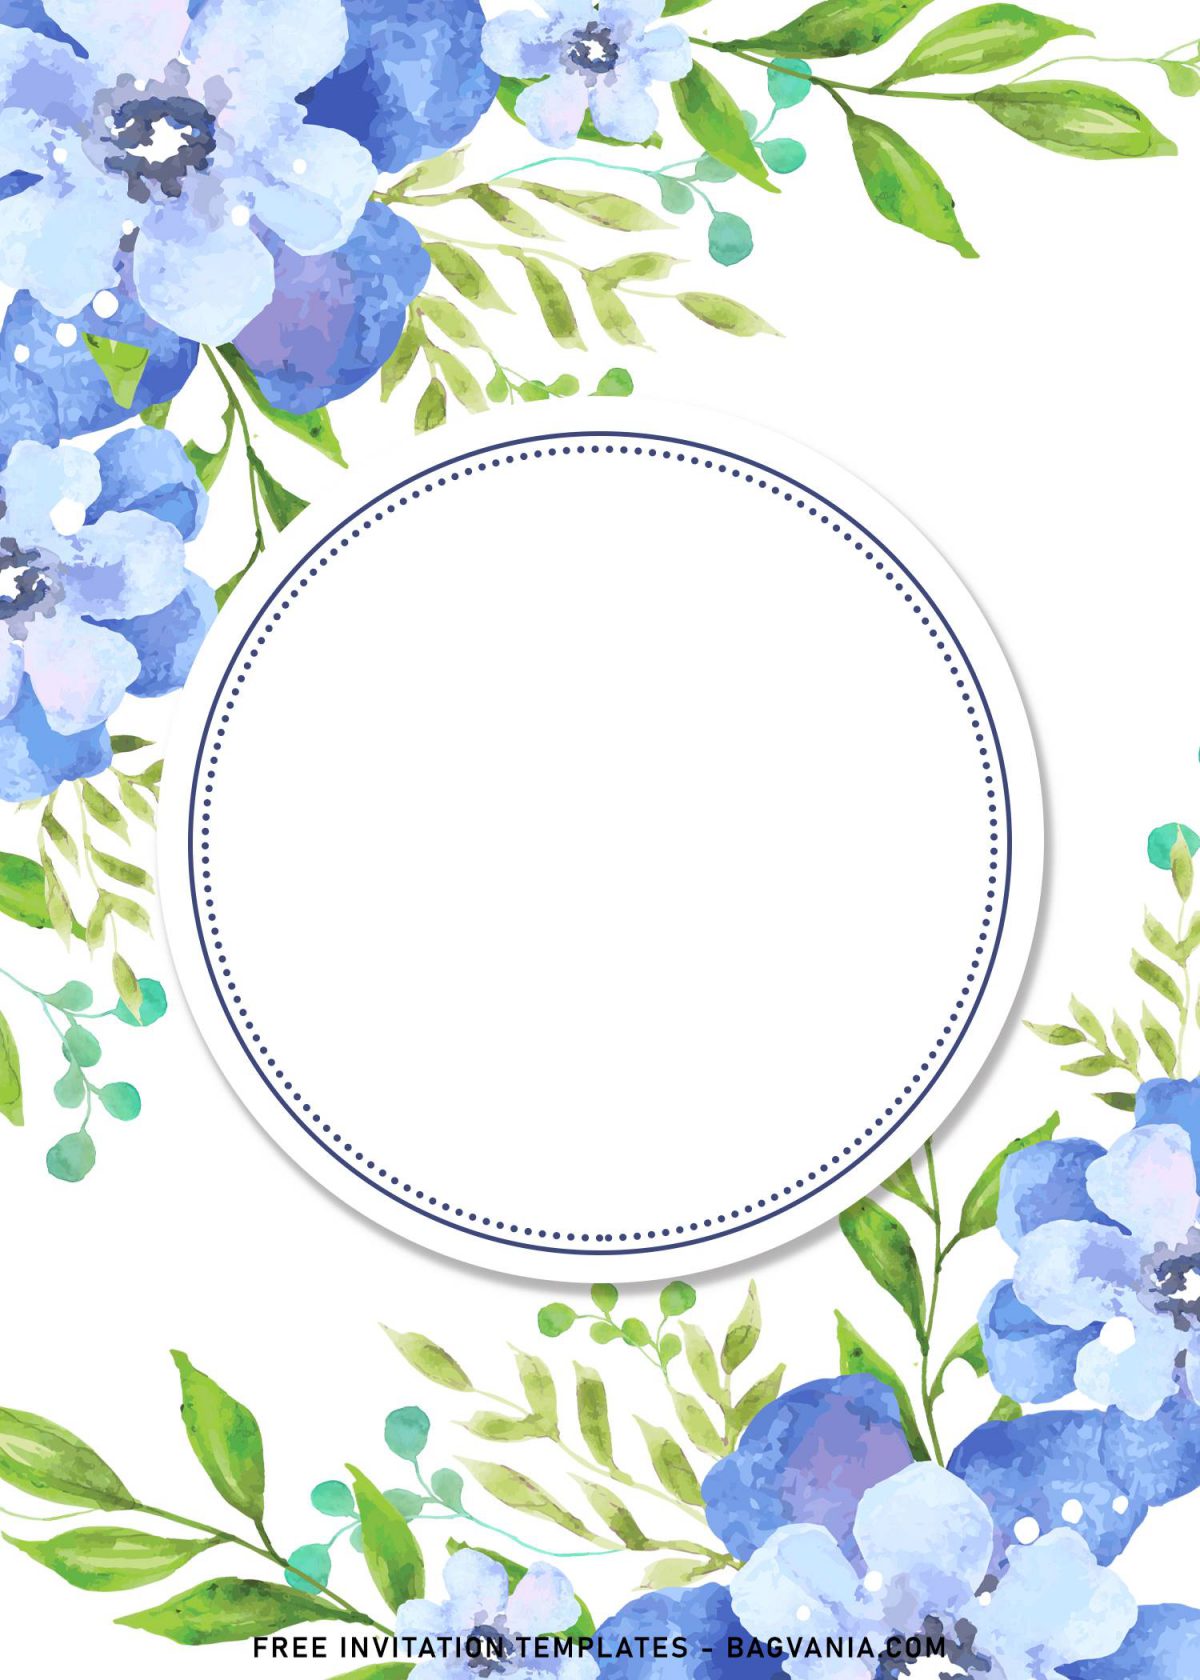 9+ Blue Floral Birthday Invitation Templates and has solid white background